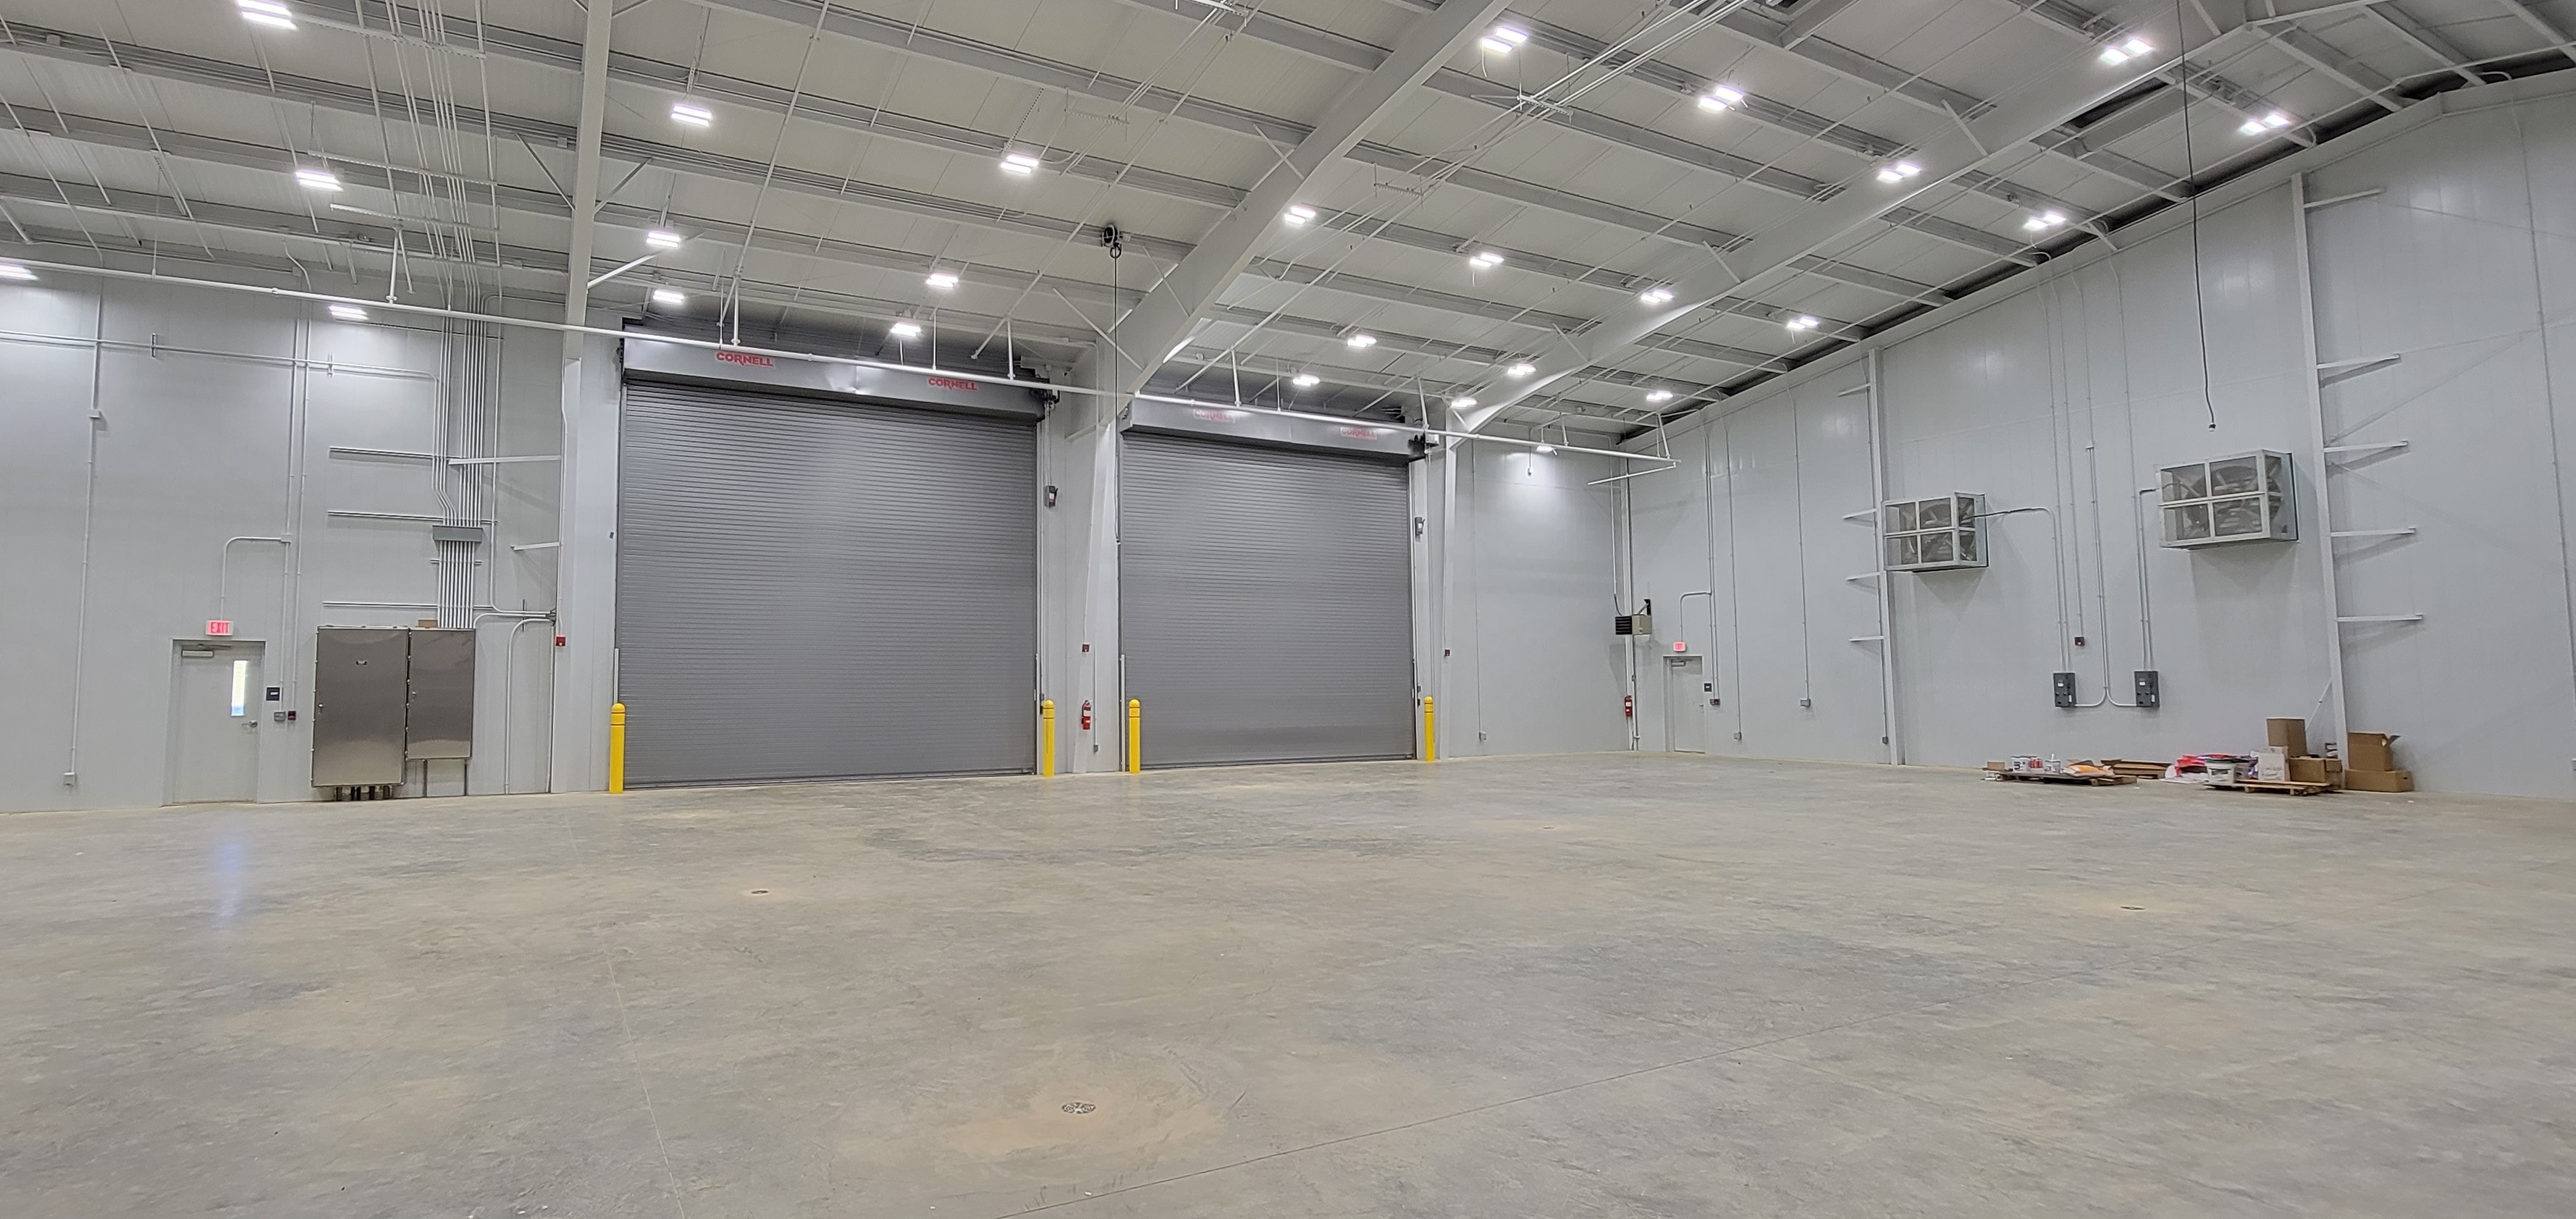 Dual loading bays, EV charging stations, and backup power generators are a few of the amenities that the Floyd Growth Center has to provide.